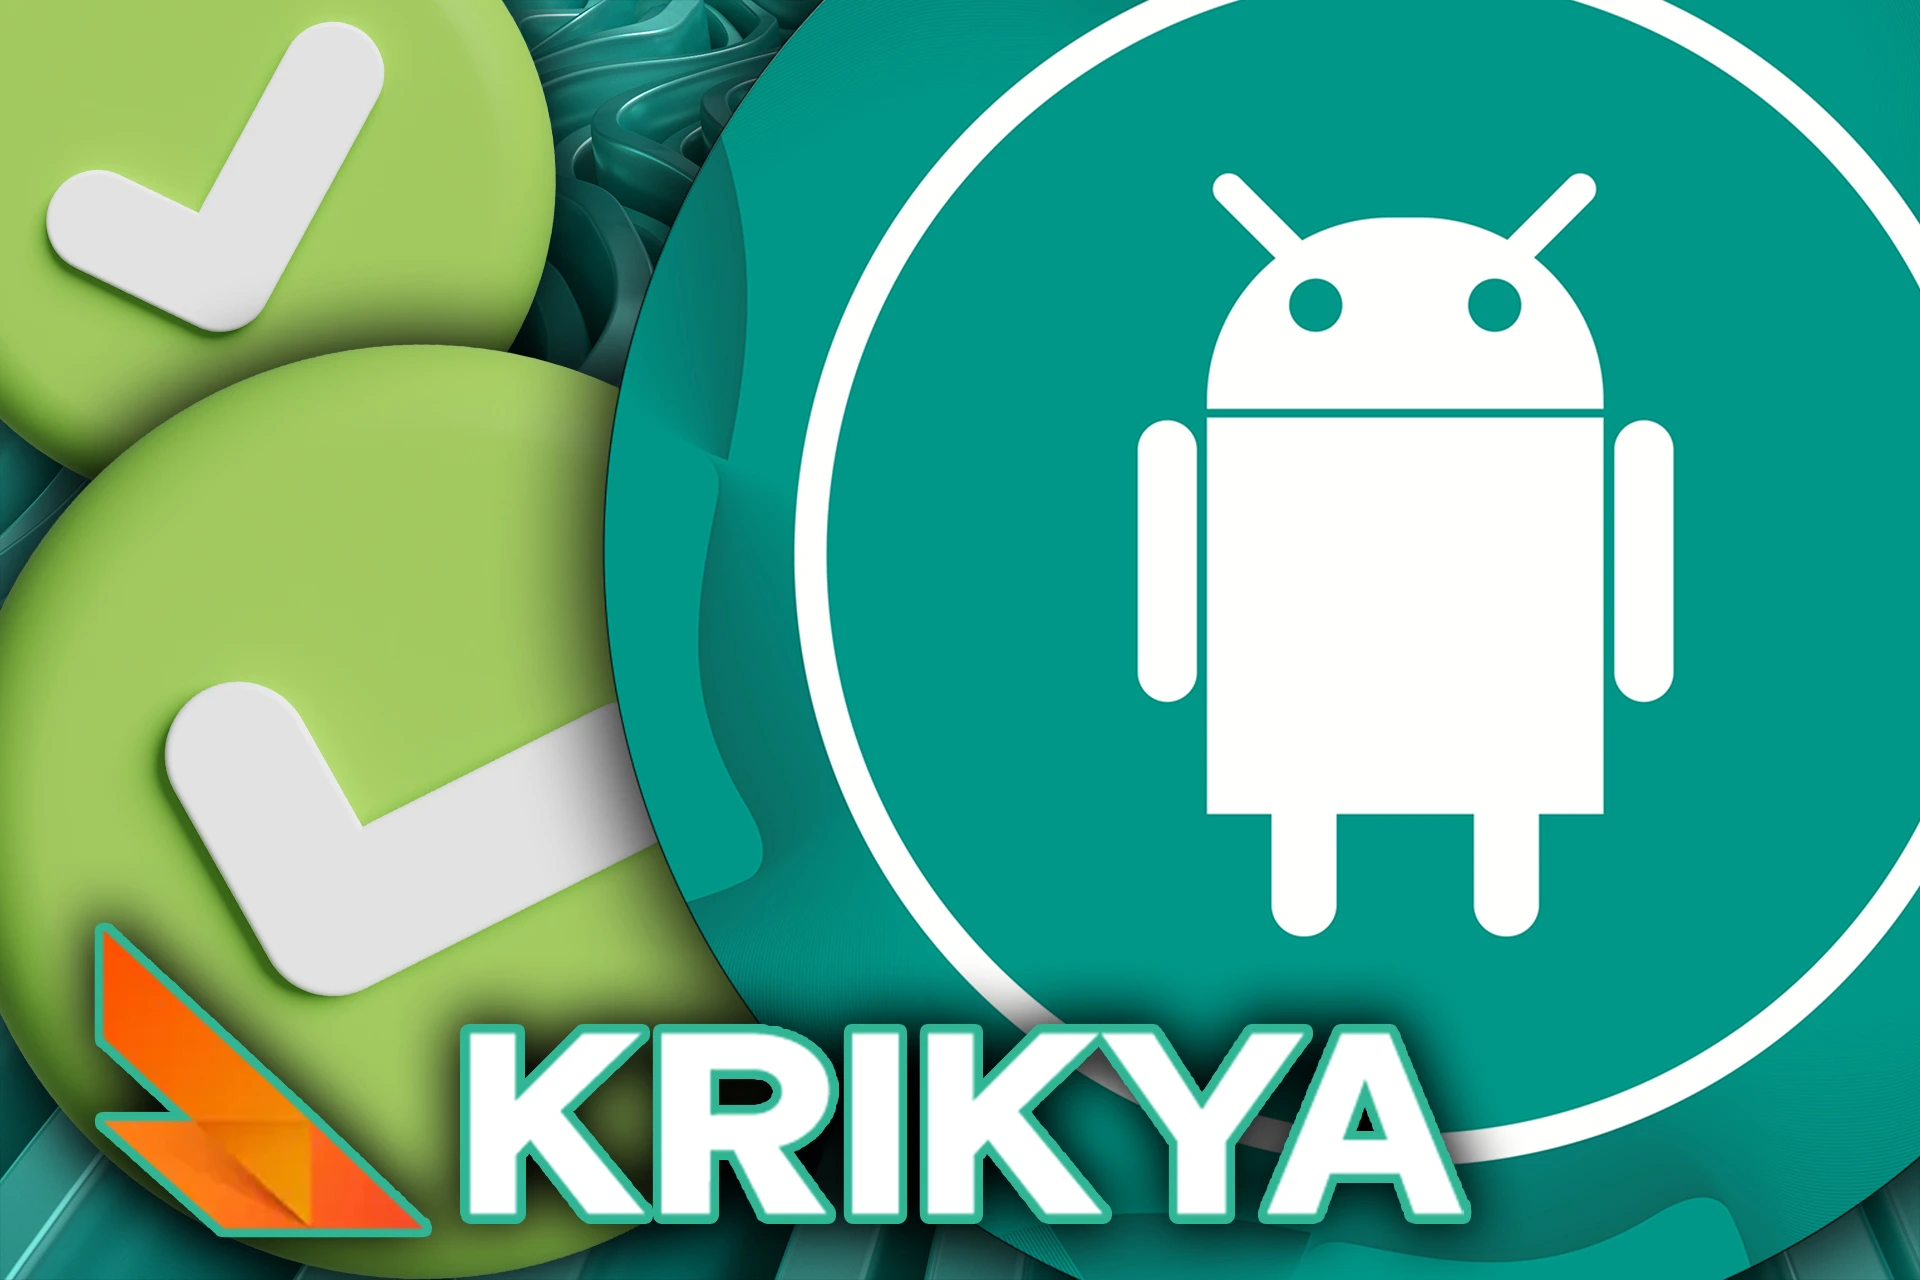 Almost all the Android devices casn easily install the Krikya app,